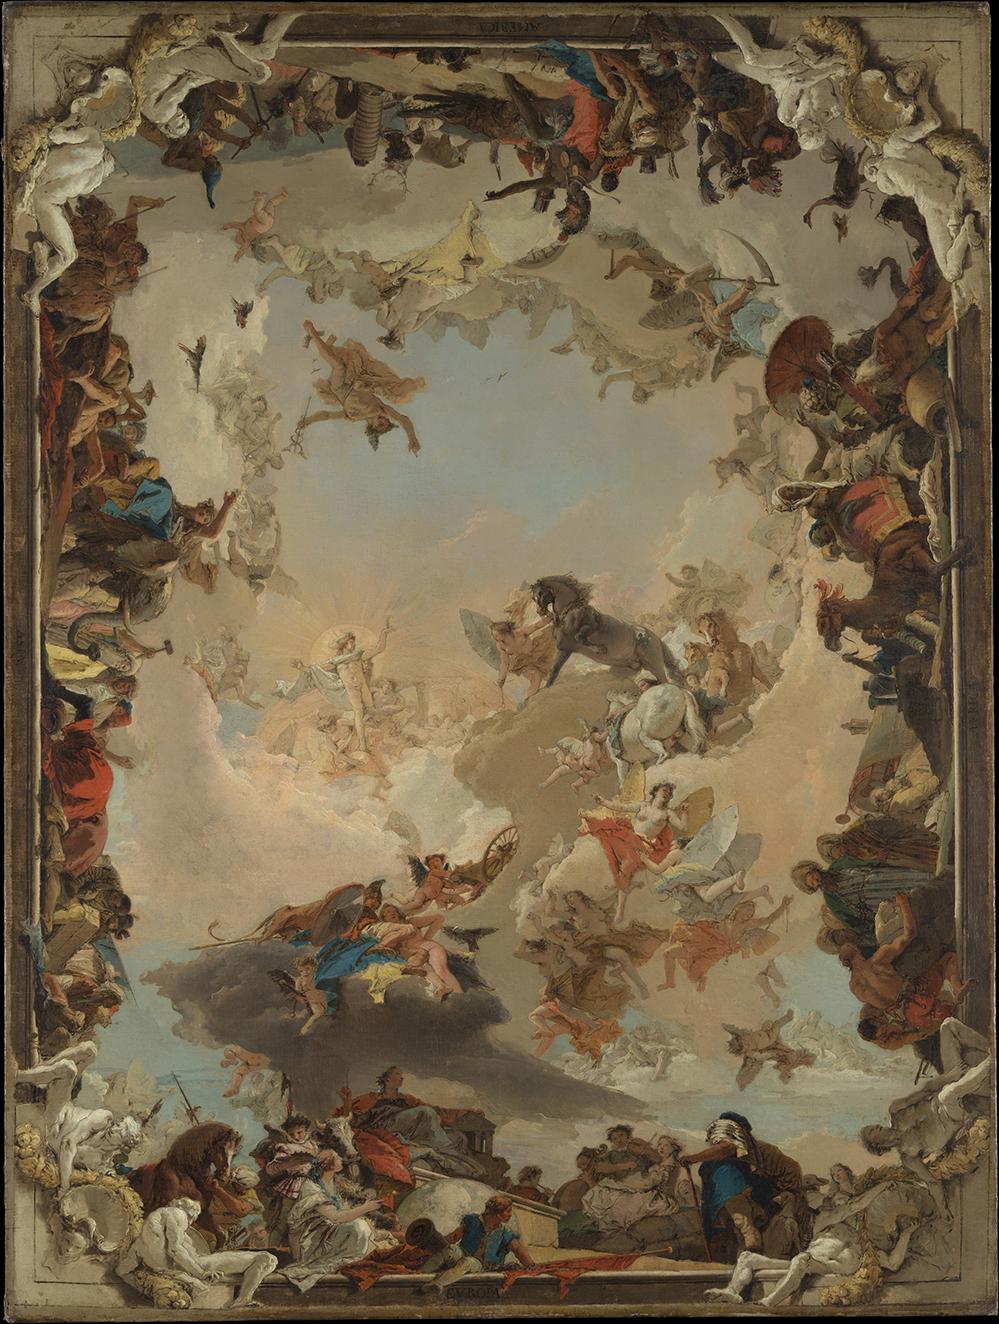 “Allegory of the Planets and Continents,” 1752 by Giovanni Battista Tiepolo. Oil on canvas. Metropolitan Museum of Art, New York. (Public Domain)